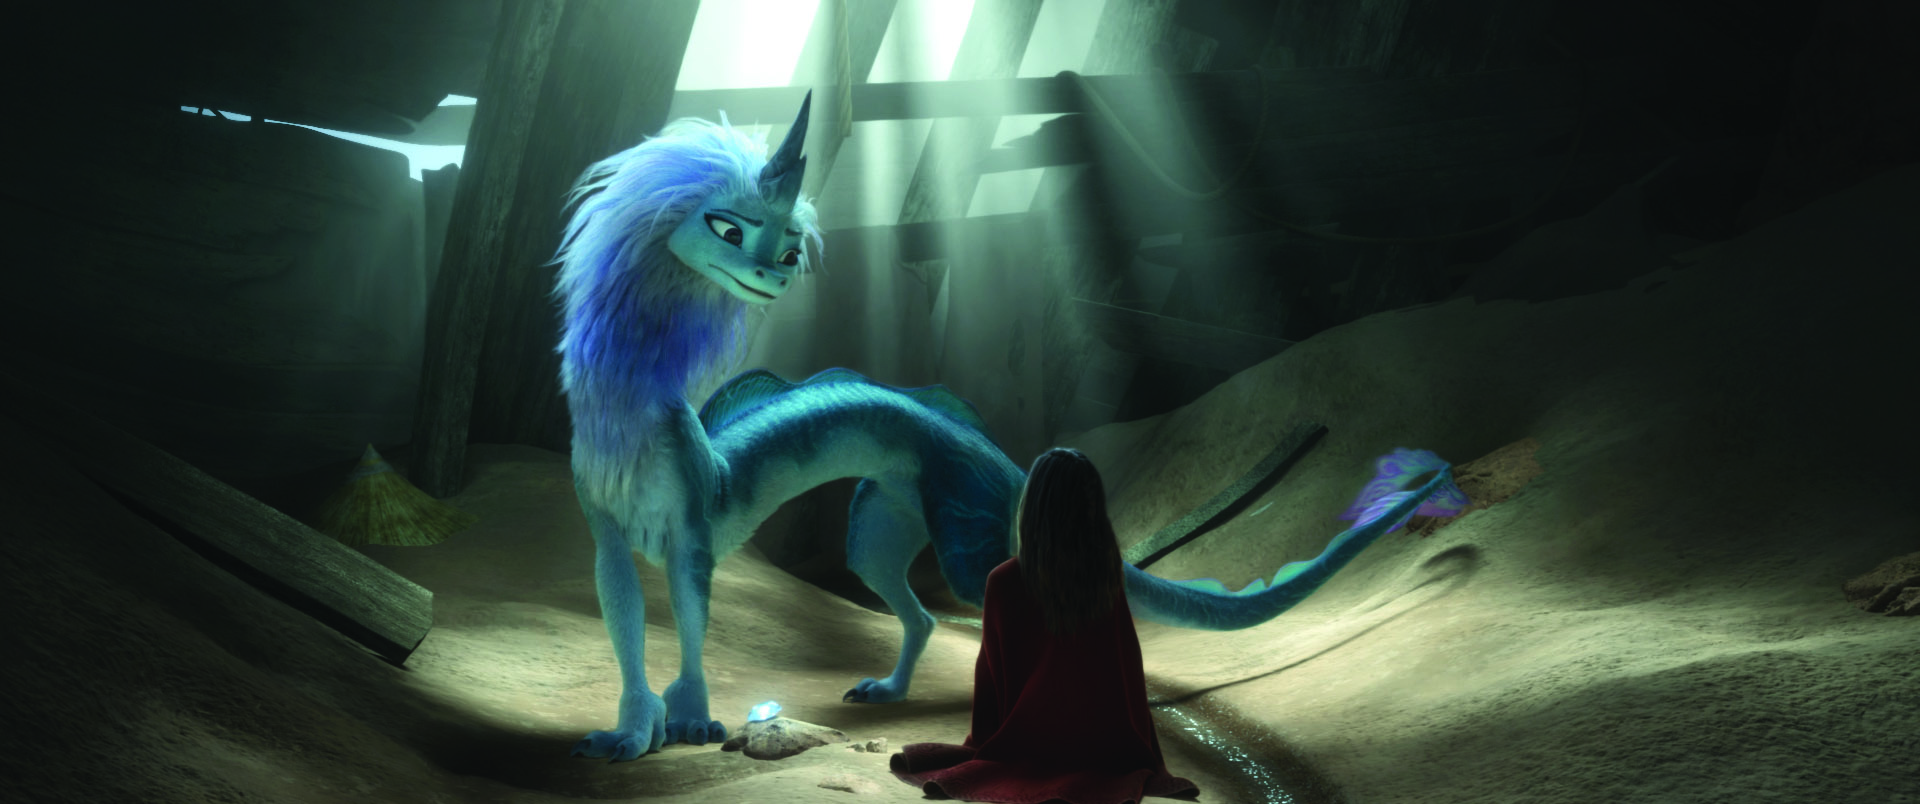 RAYA AND THE LAST DRAGON - Sisu is a magical, mythical, self-deprecating dragon. © 2020 Disney. All Rights Reserved.